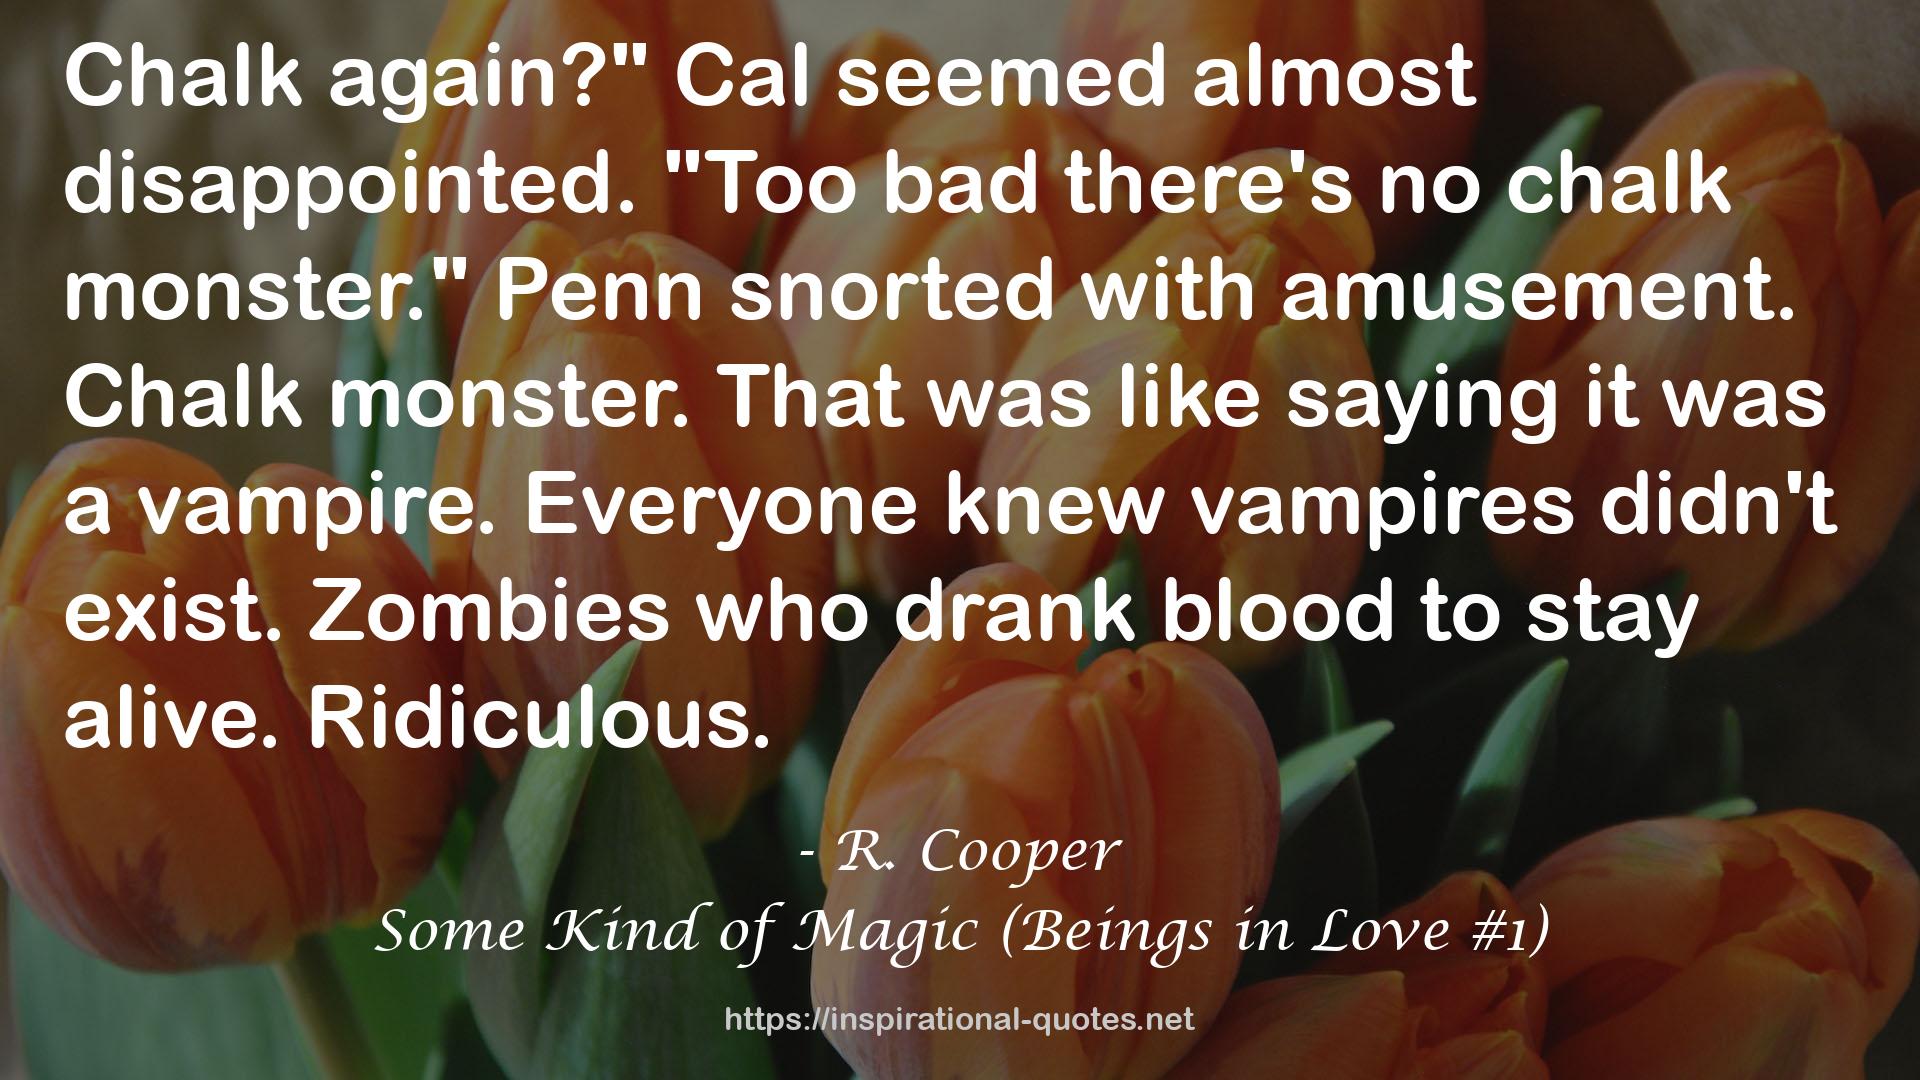 Some Kind of Magic (Beings in Love #1) QUOTES